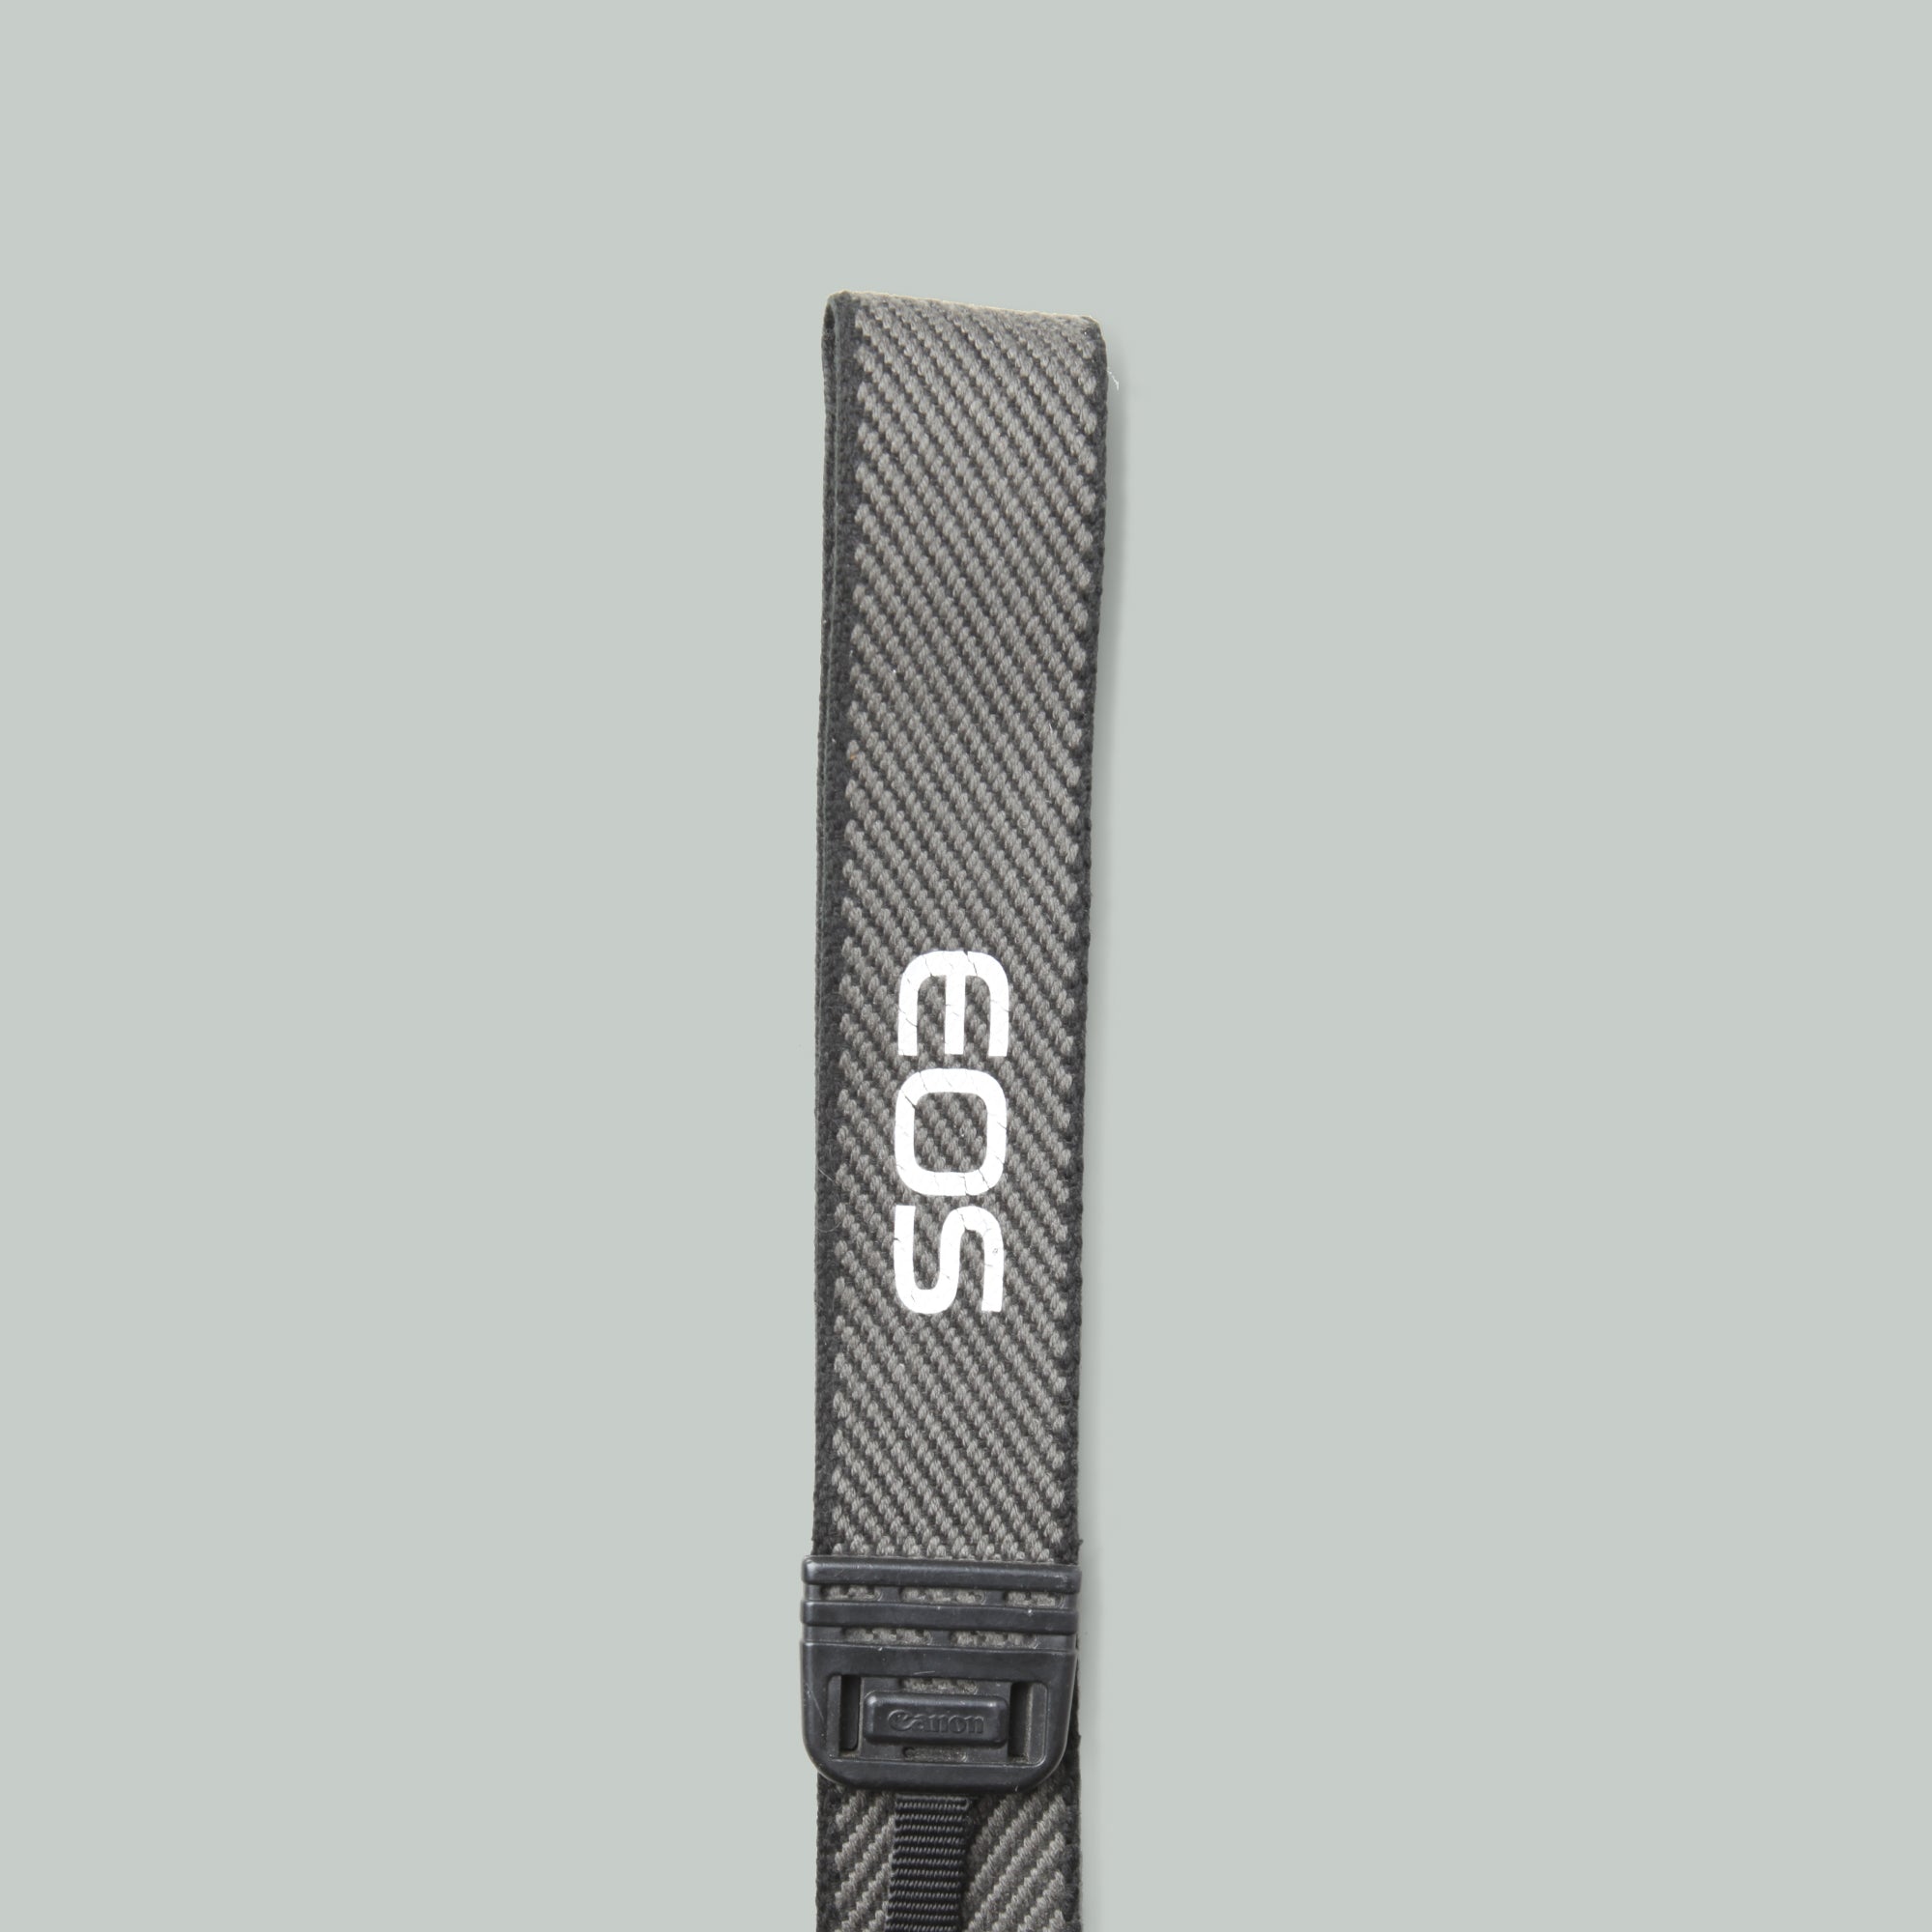 Buy Canon EOS strap now at Analogue Amsterdam